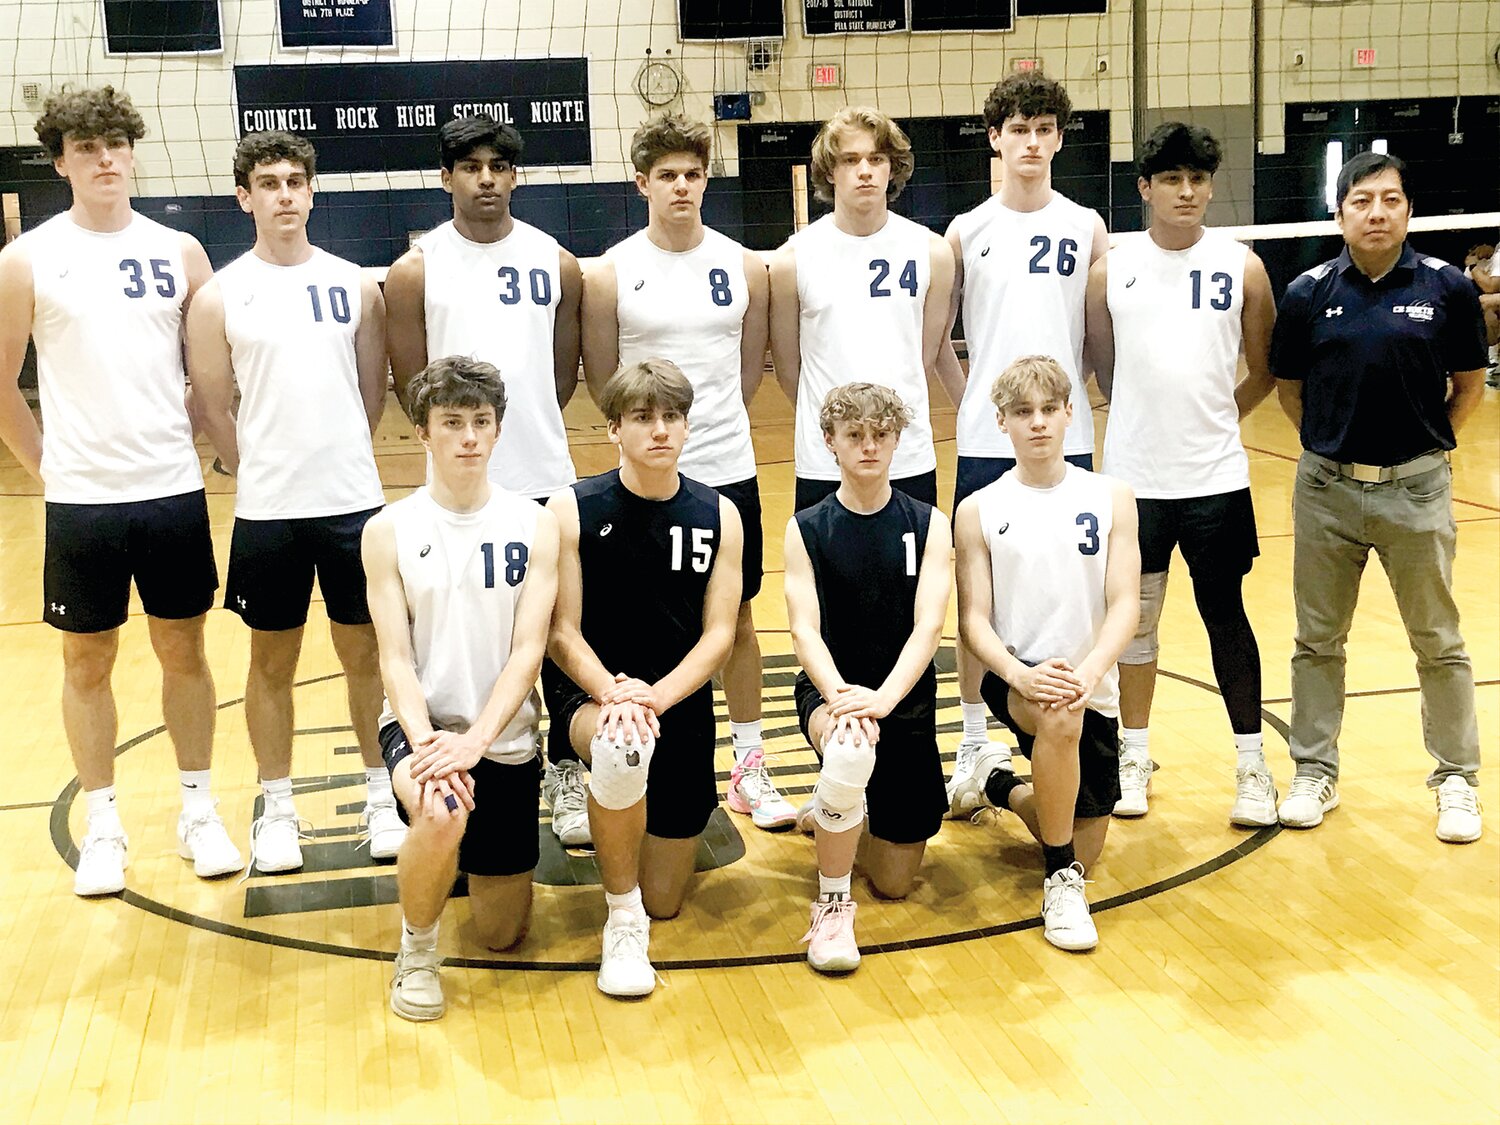 The Council Rock North boys volleyball team defeated Cheltenham 3-0 Tuesday.